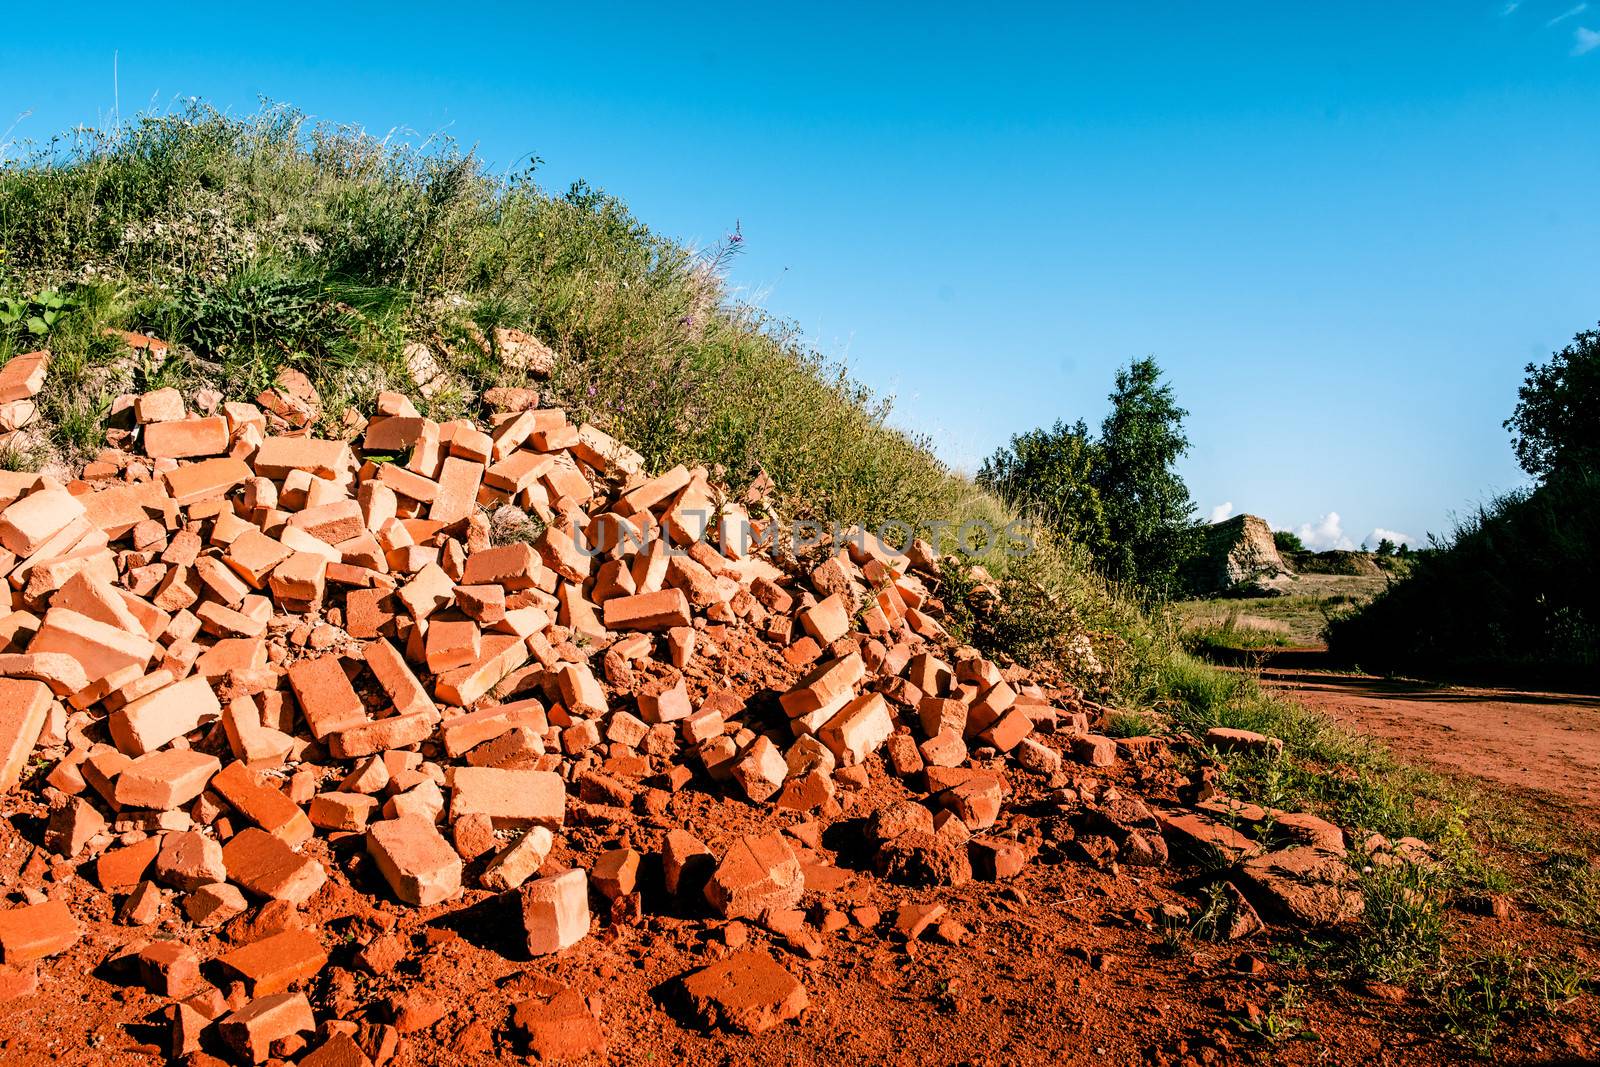 Pile of red bricks in the nature